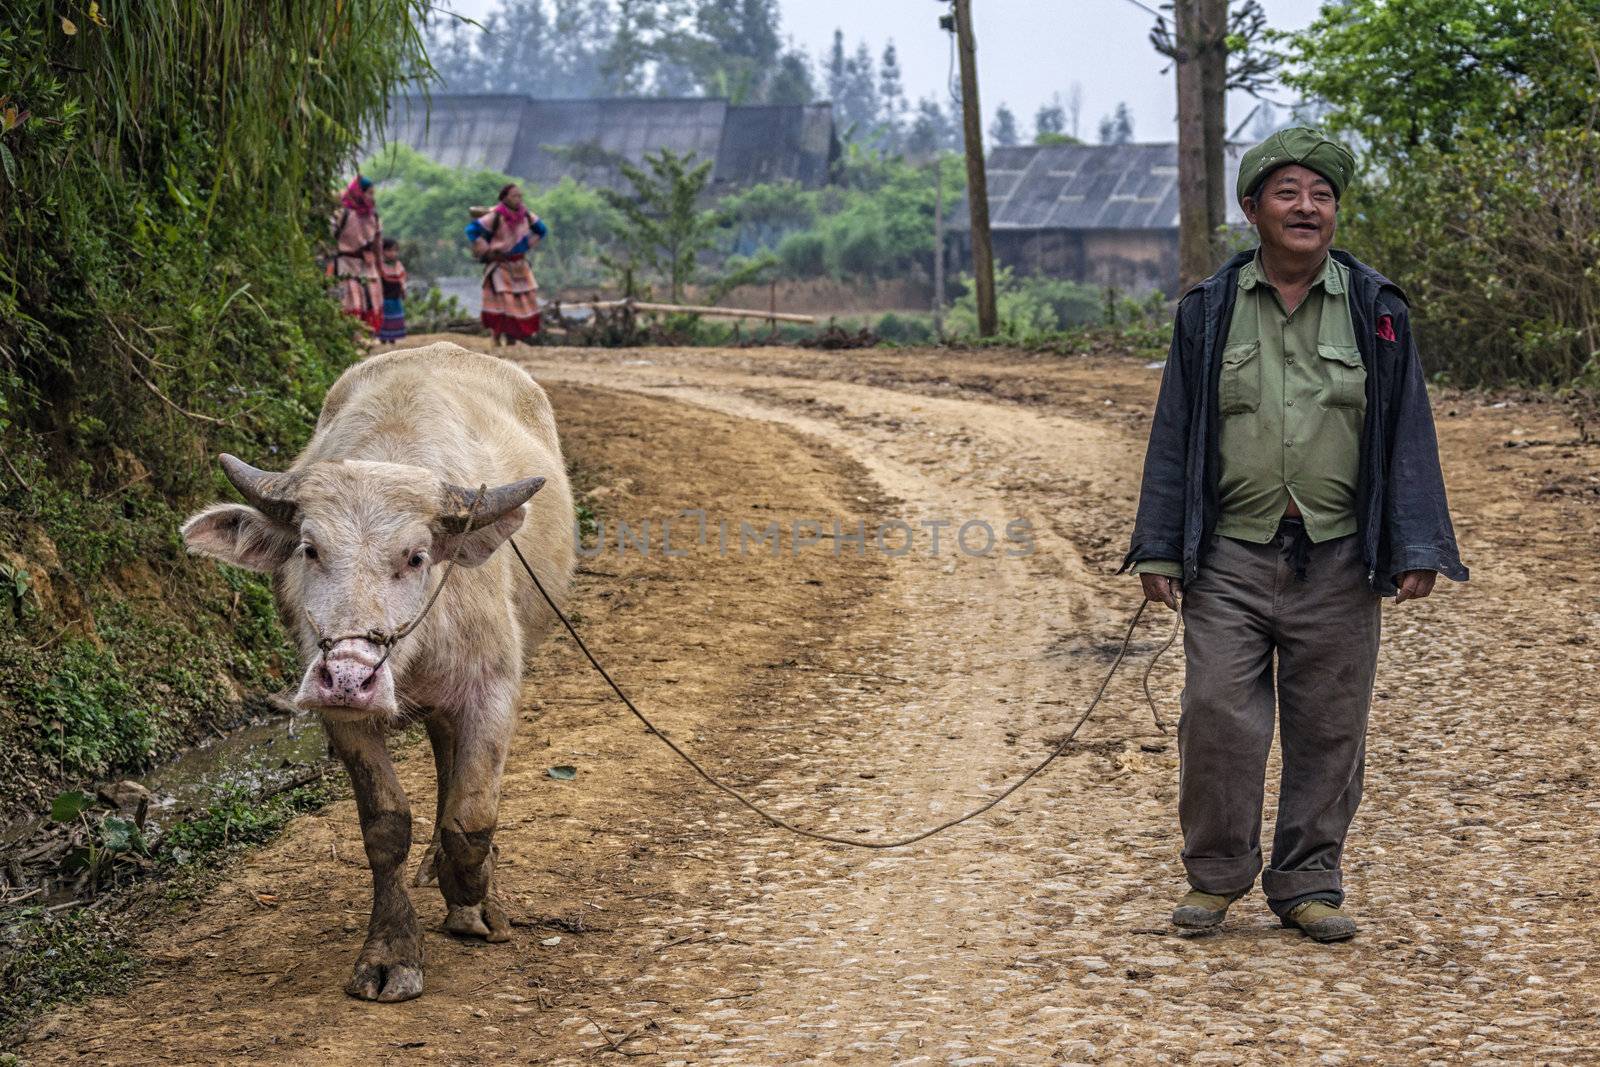 Rare animal comes from the market while Hmong women appear around the bend.